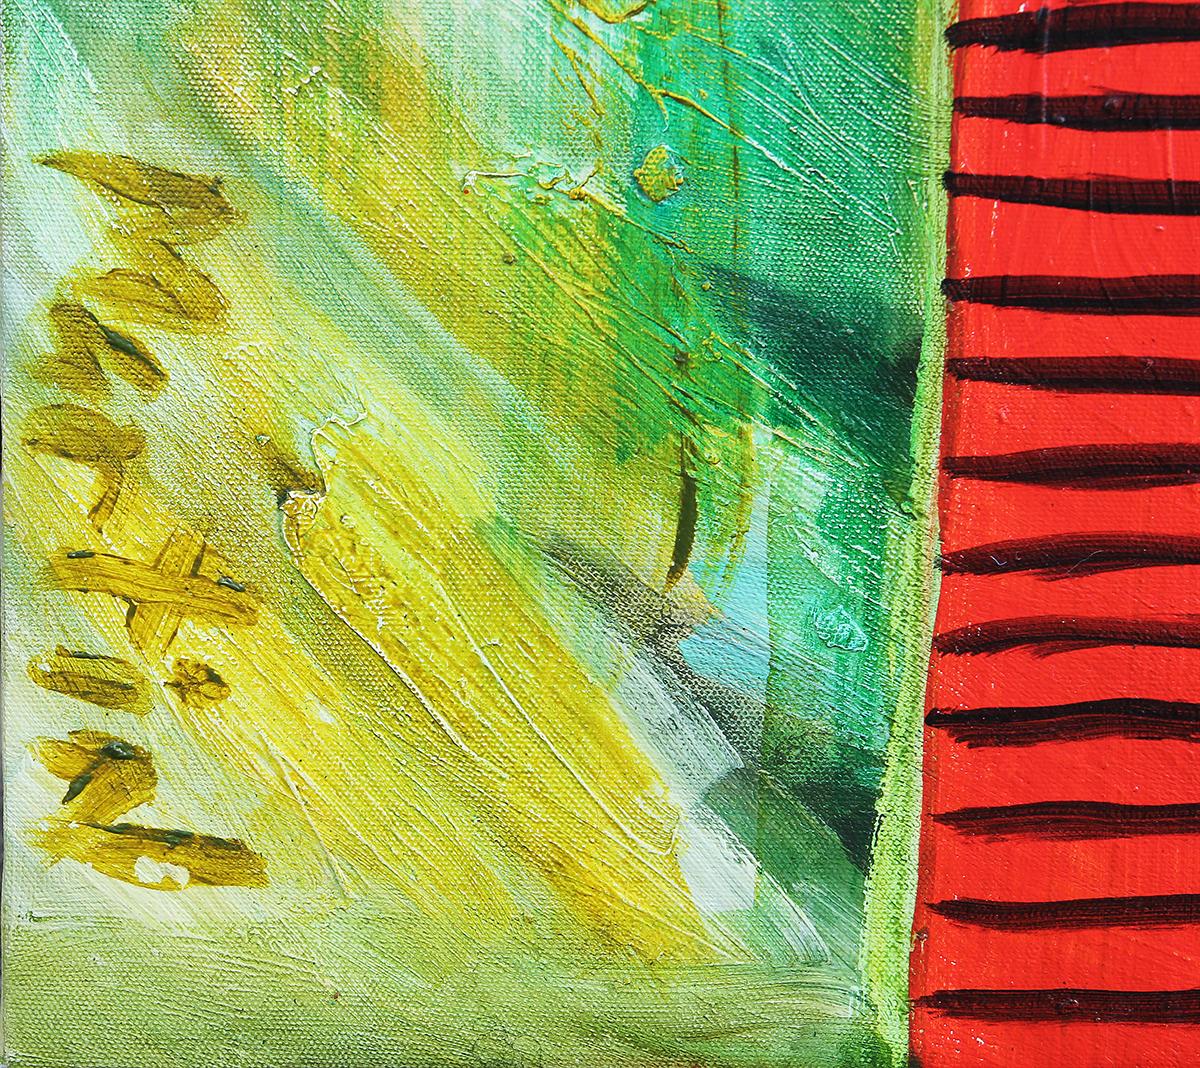 Abstract portrait painting by contemporary Houston artist Larry Martin. The work features an elongated yellow figure wearing a red and black striped shirt against a green toned background. Signed by the artist in the front lower left corner.